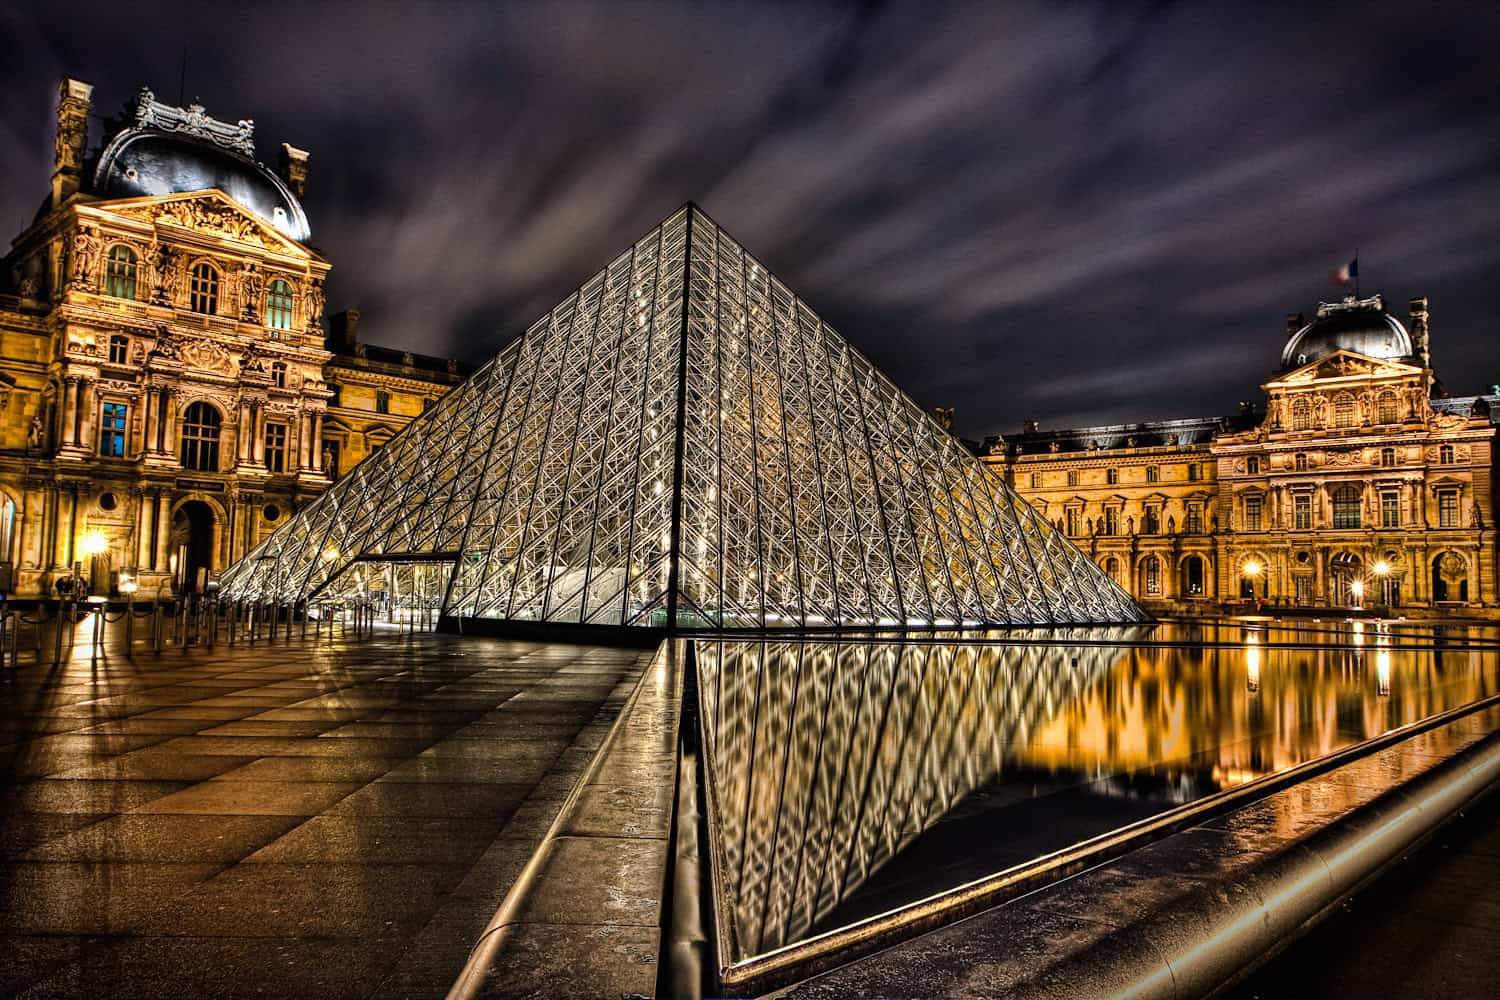 outside the Louvre museum, night capture 